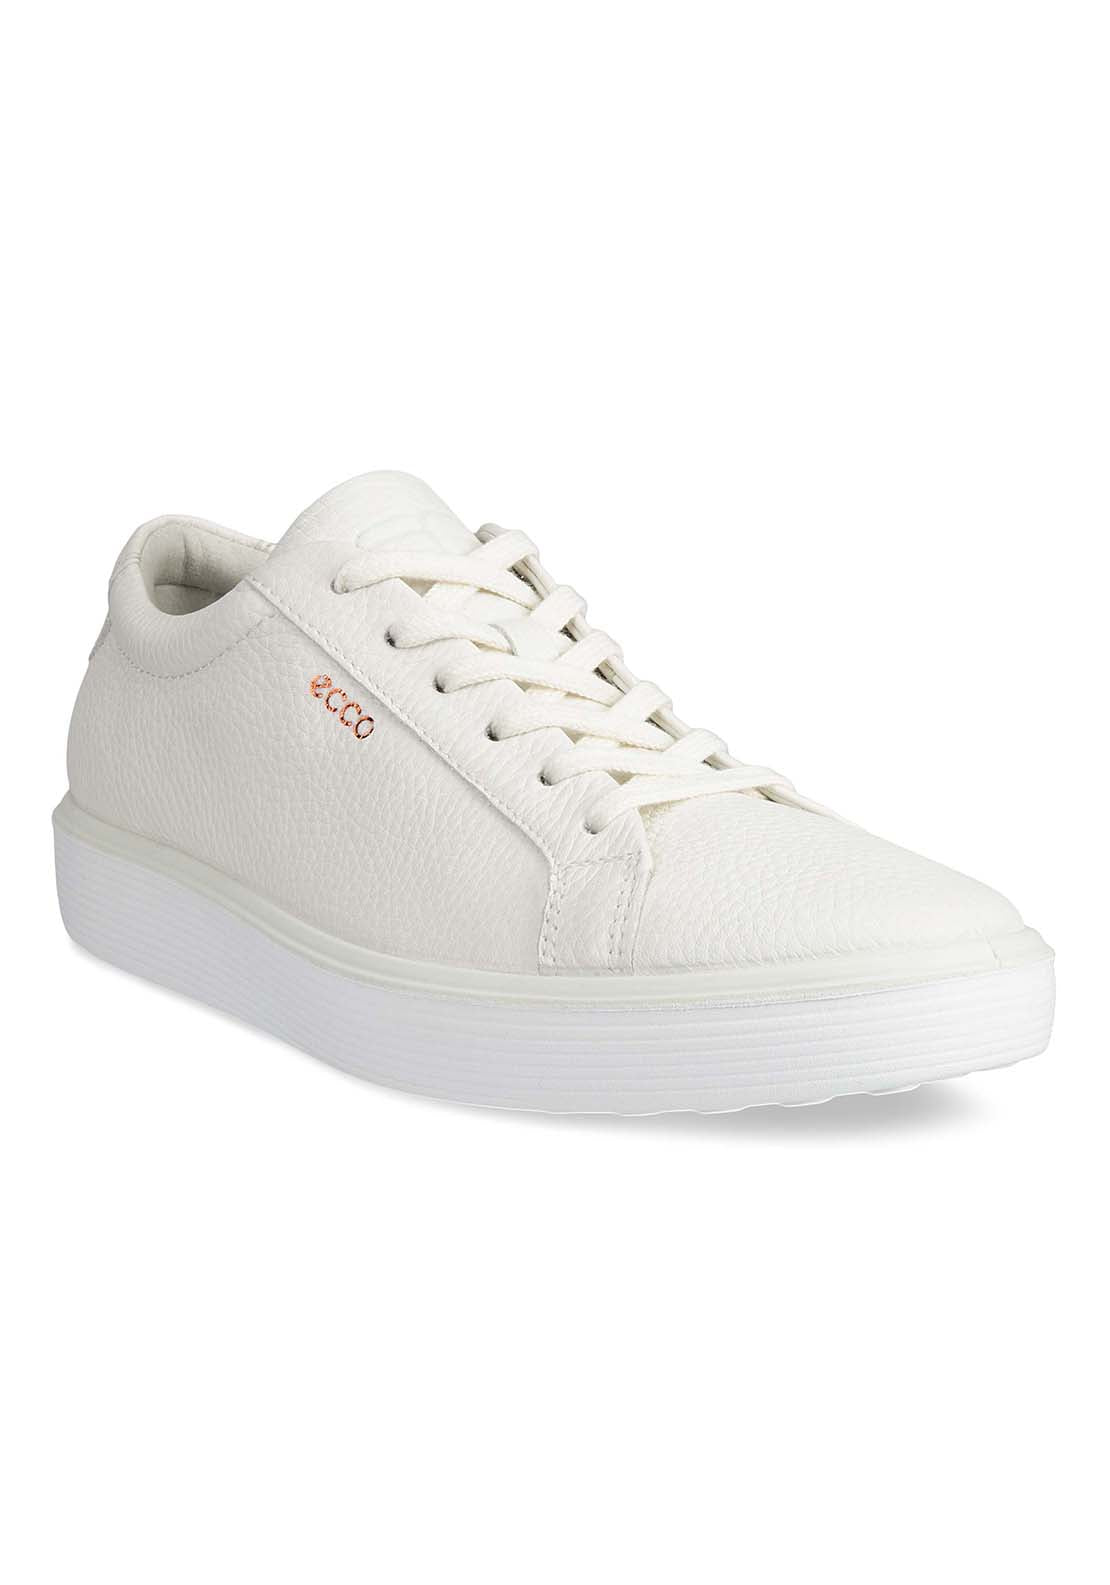 Ecco Soft 60 Casual Shoe 1 Shaws Department Stores